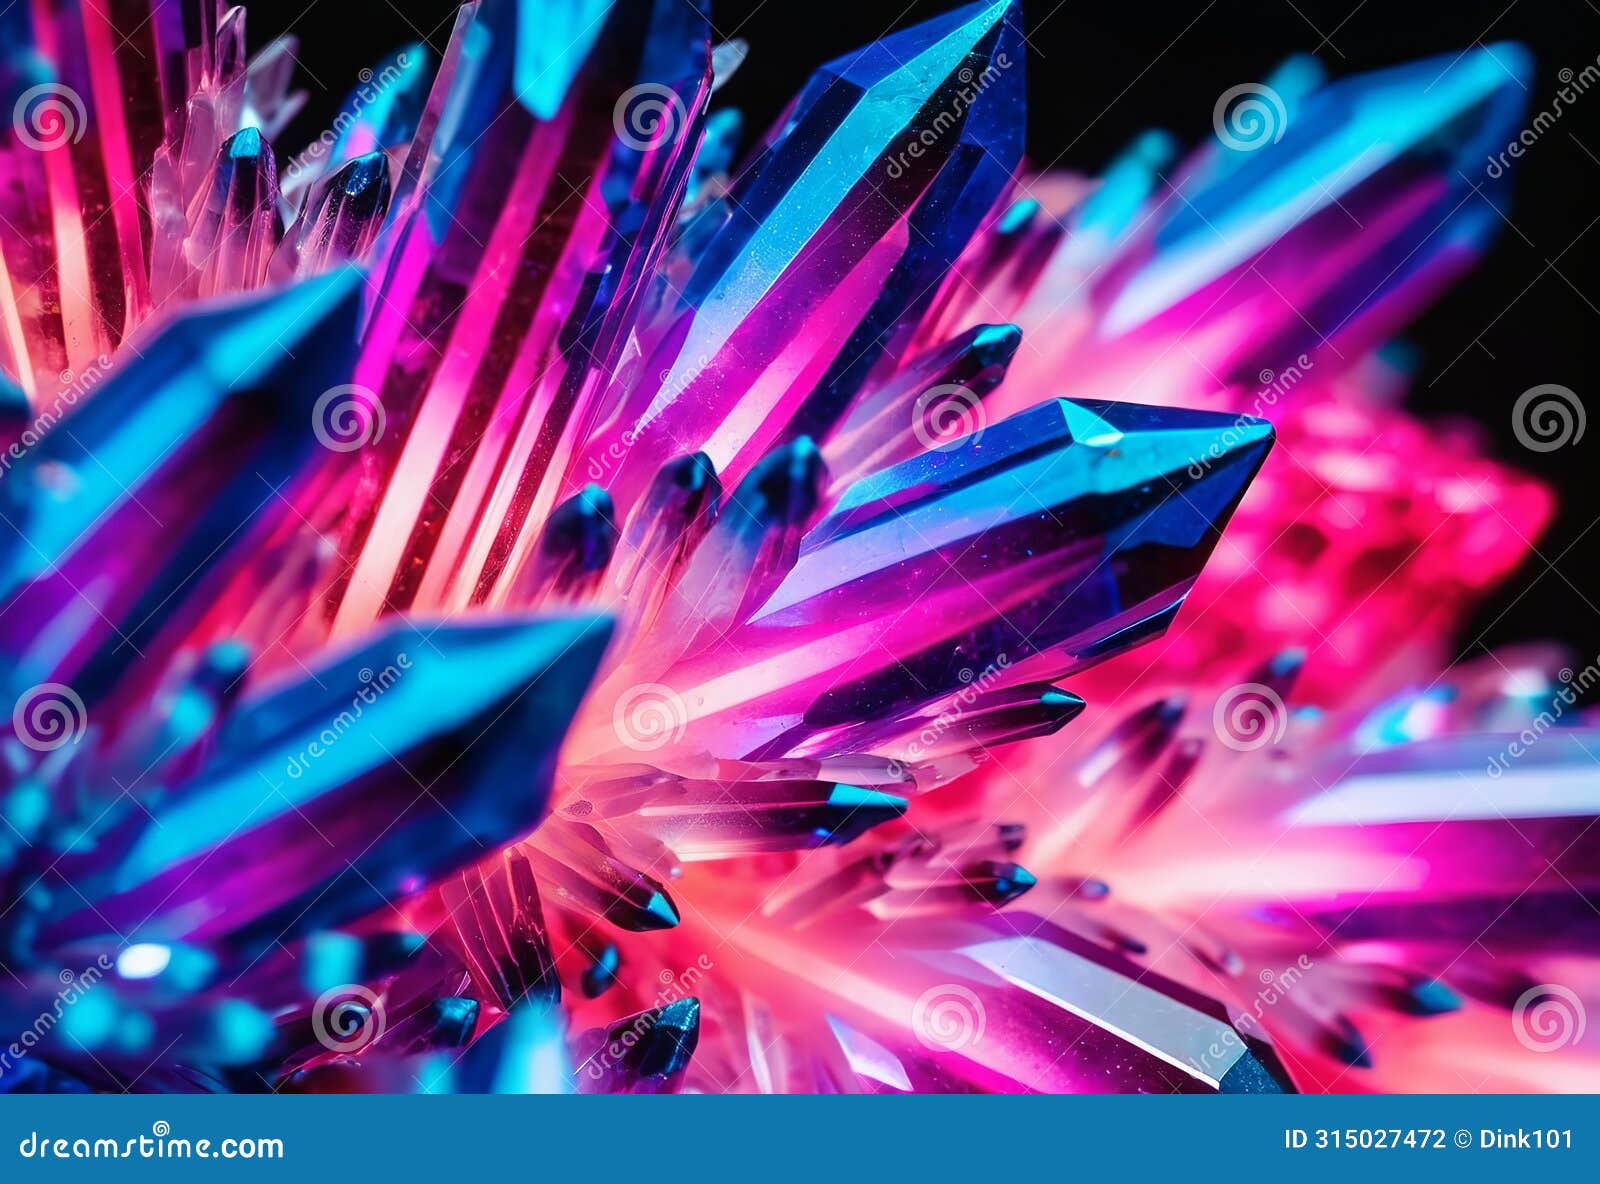 beautiful bright lucent crystals, close-up abstract background